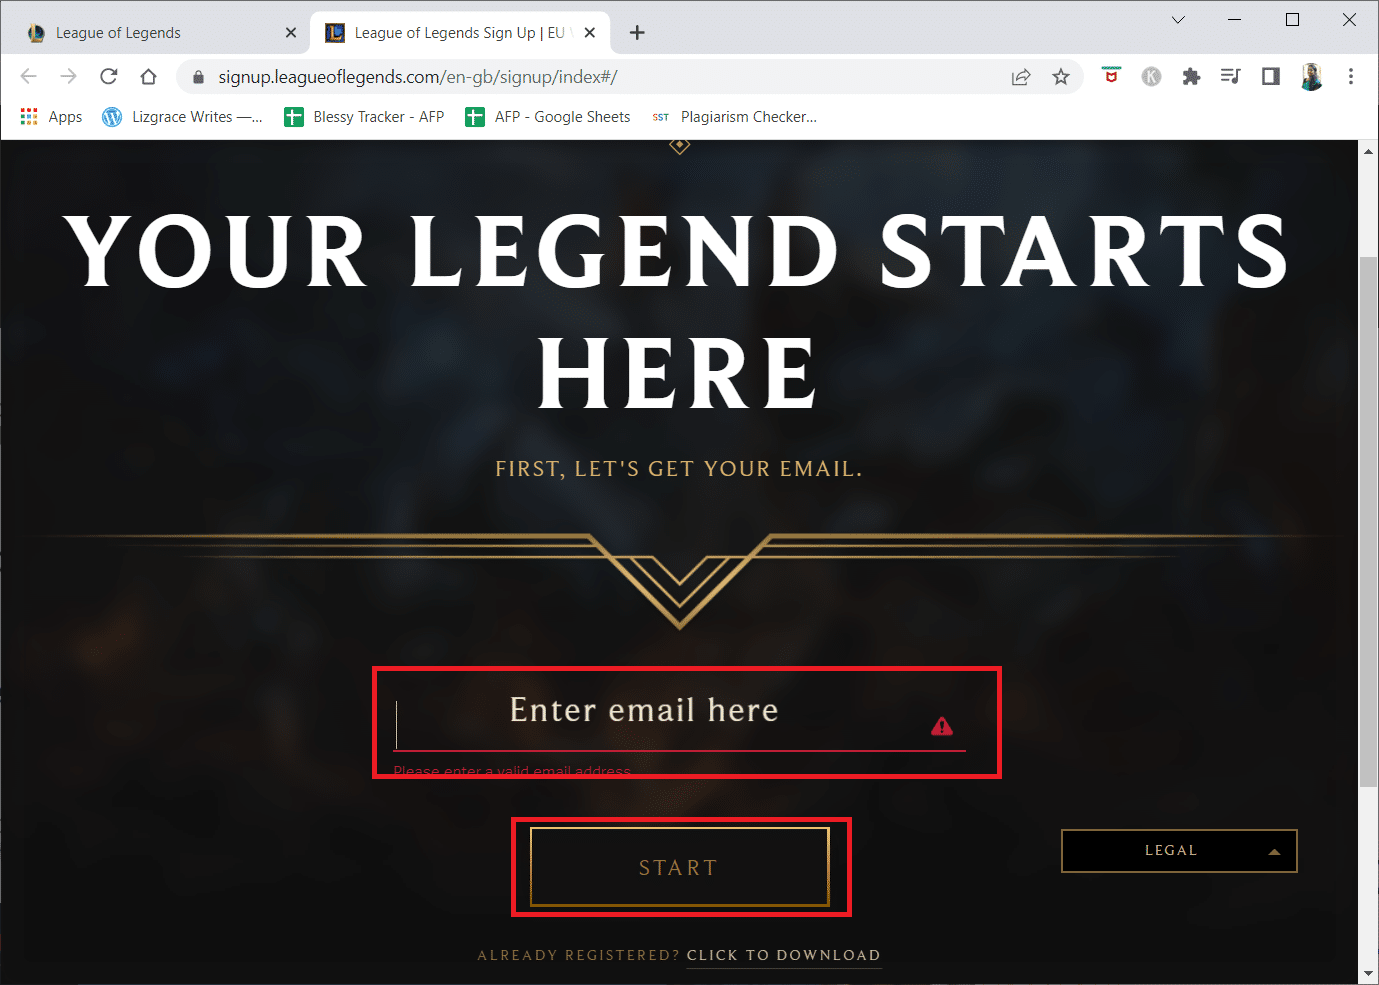 Enter your Email address and click on START. Fix Unspecified Error League of Legends in Windows 10